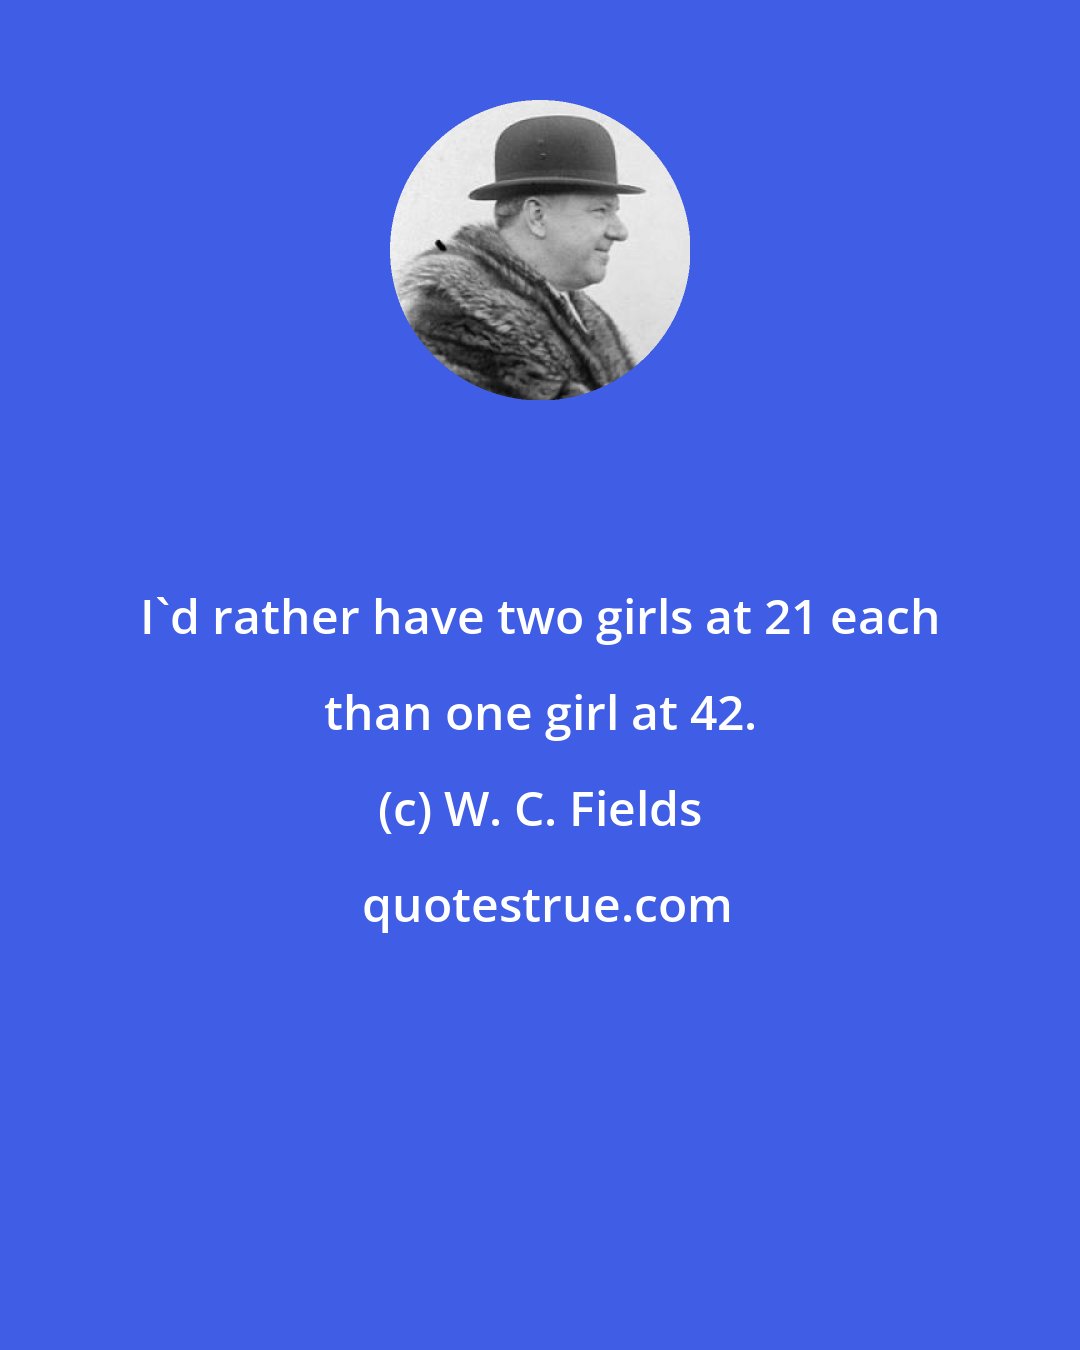 W. C. Fields: I'd rather have two girls at 21 each than one girl at 42.